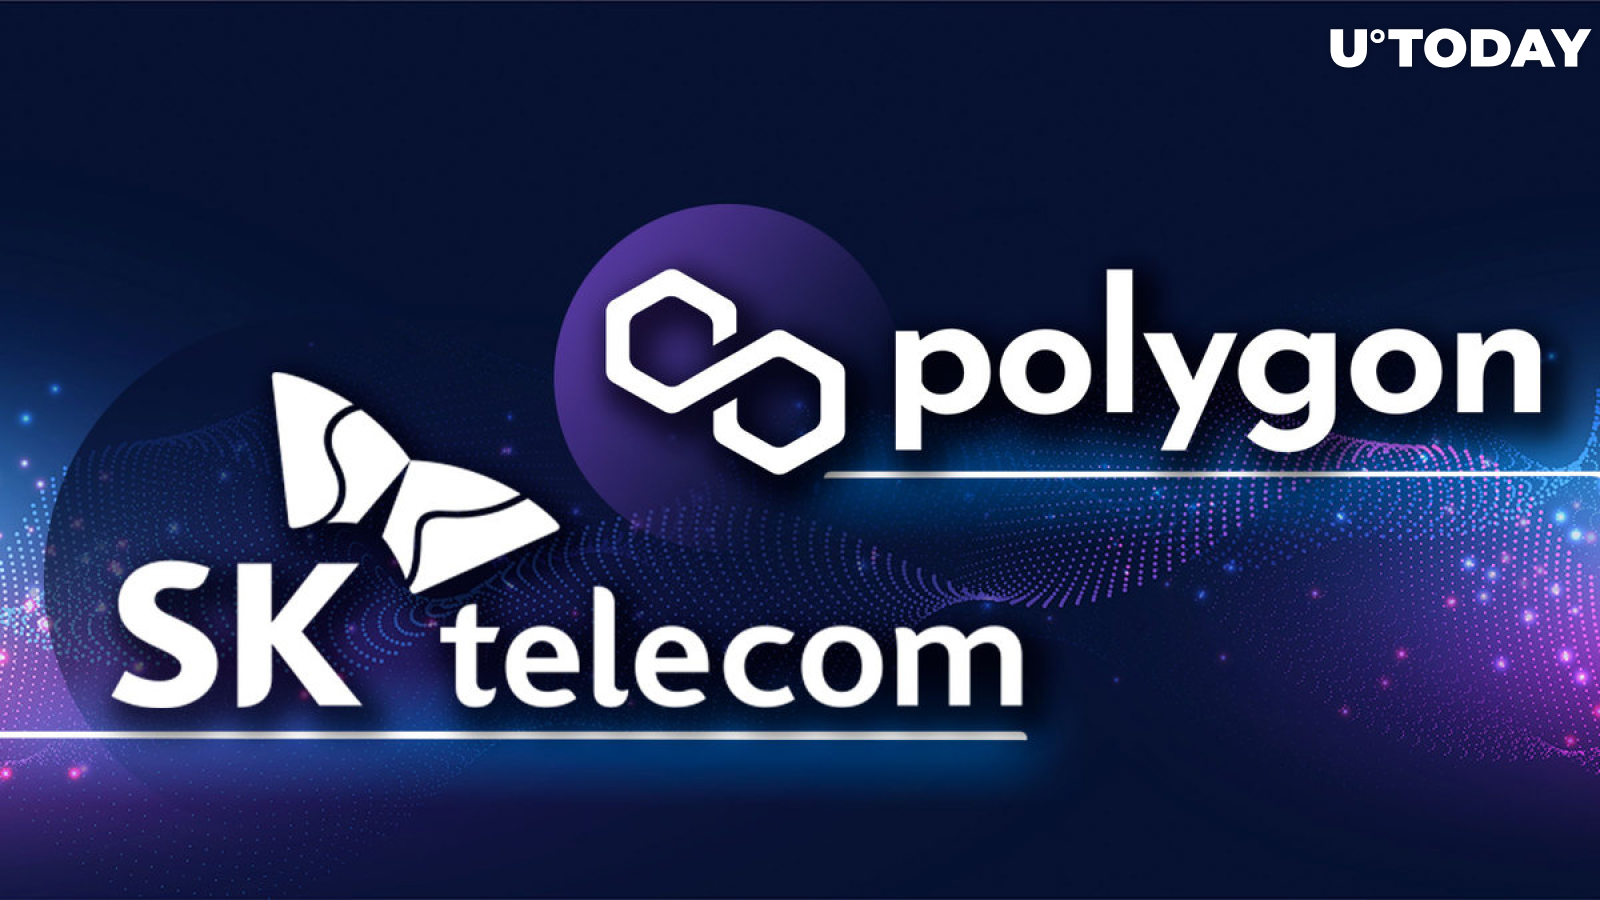 Polygon (MATIC) Partners With Largest Korean Telecom Giant